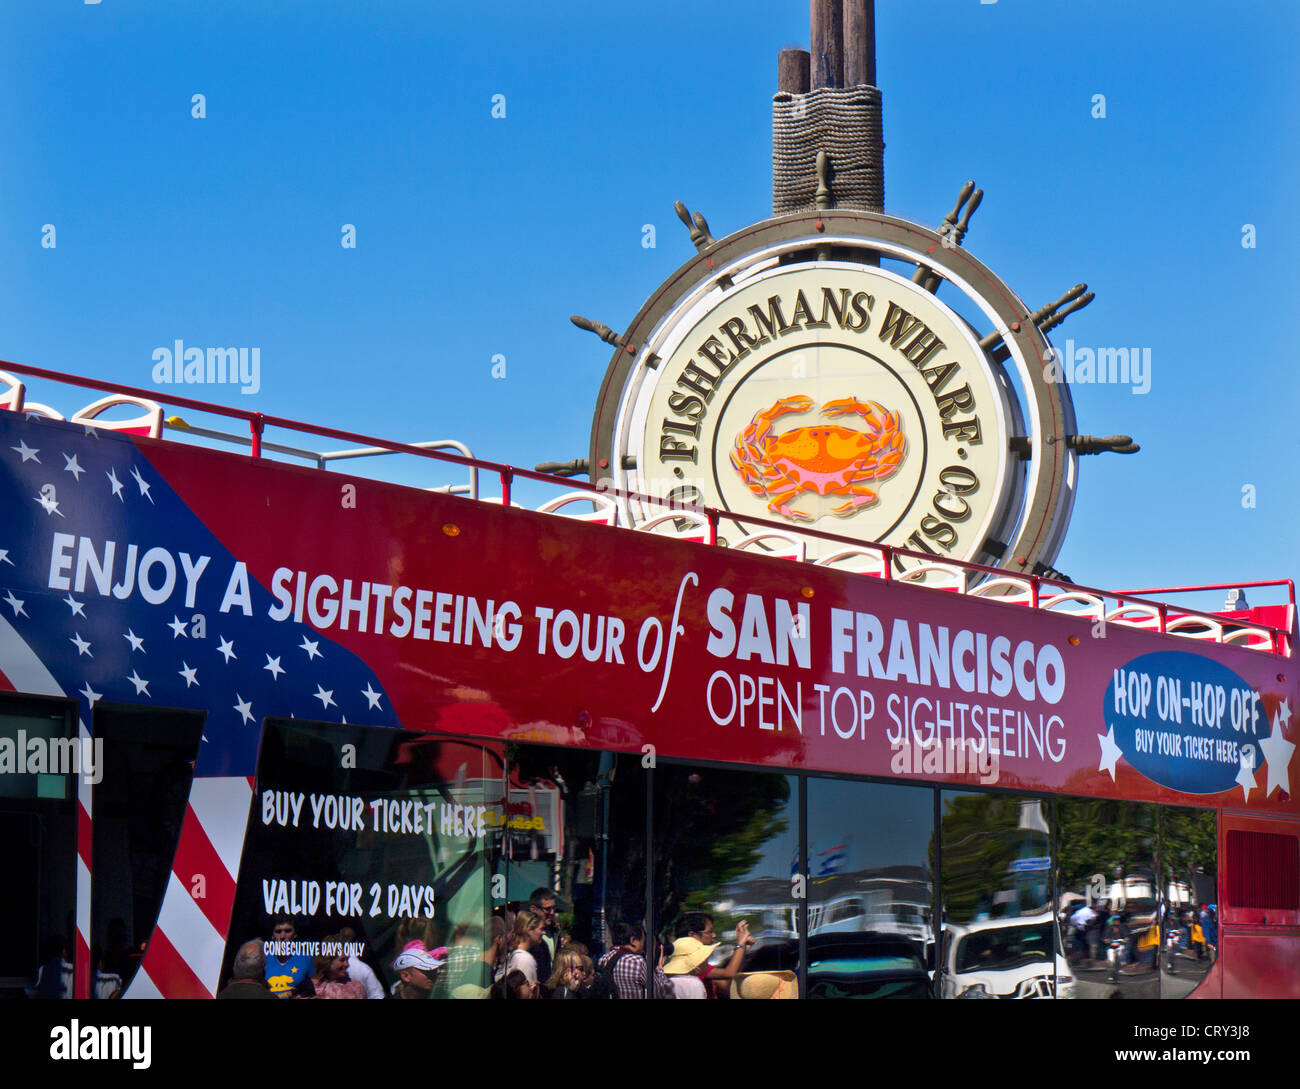 Open top red city tour bus at Fisherman's Wharf sign with tourists reflected in tinted windows San Francisco California USA Stock Photo